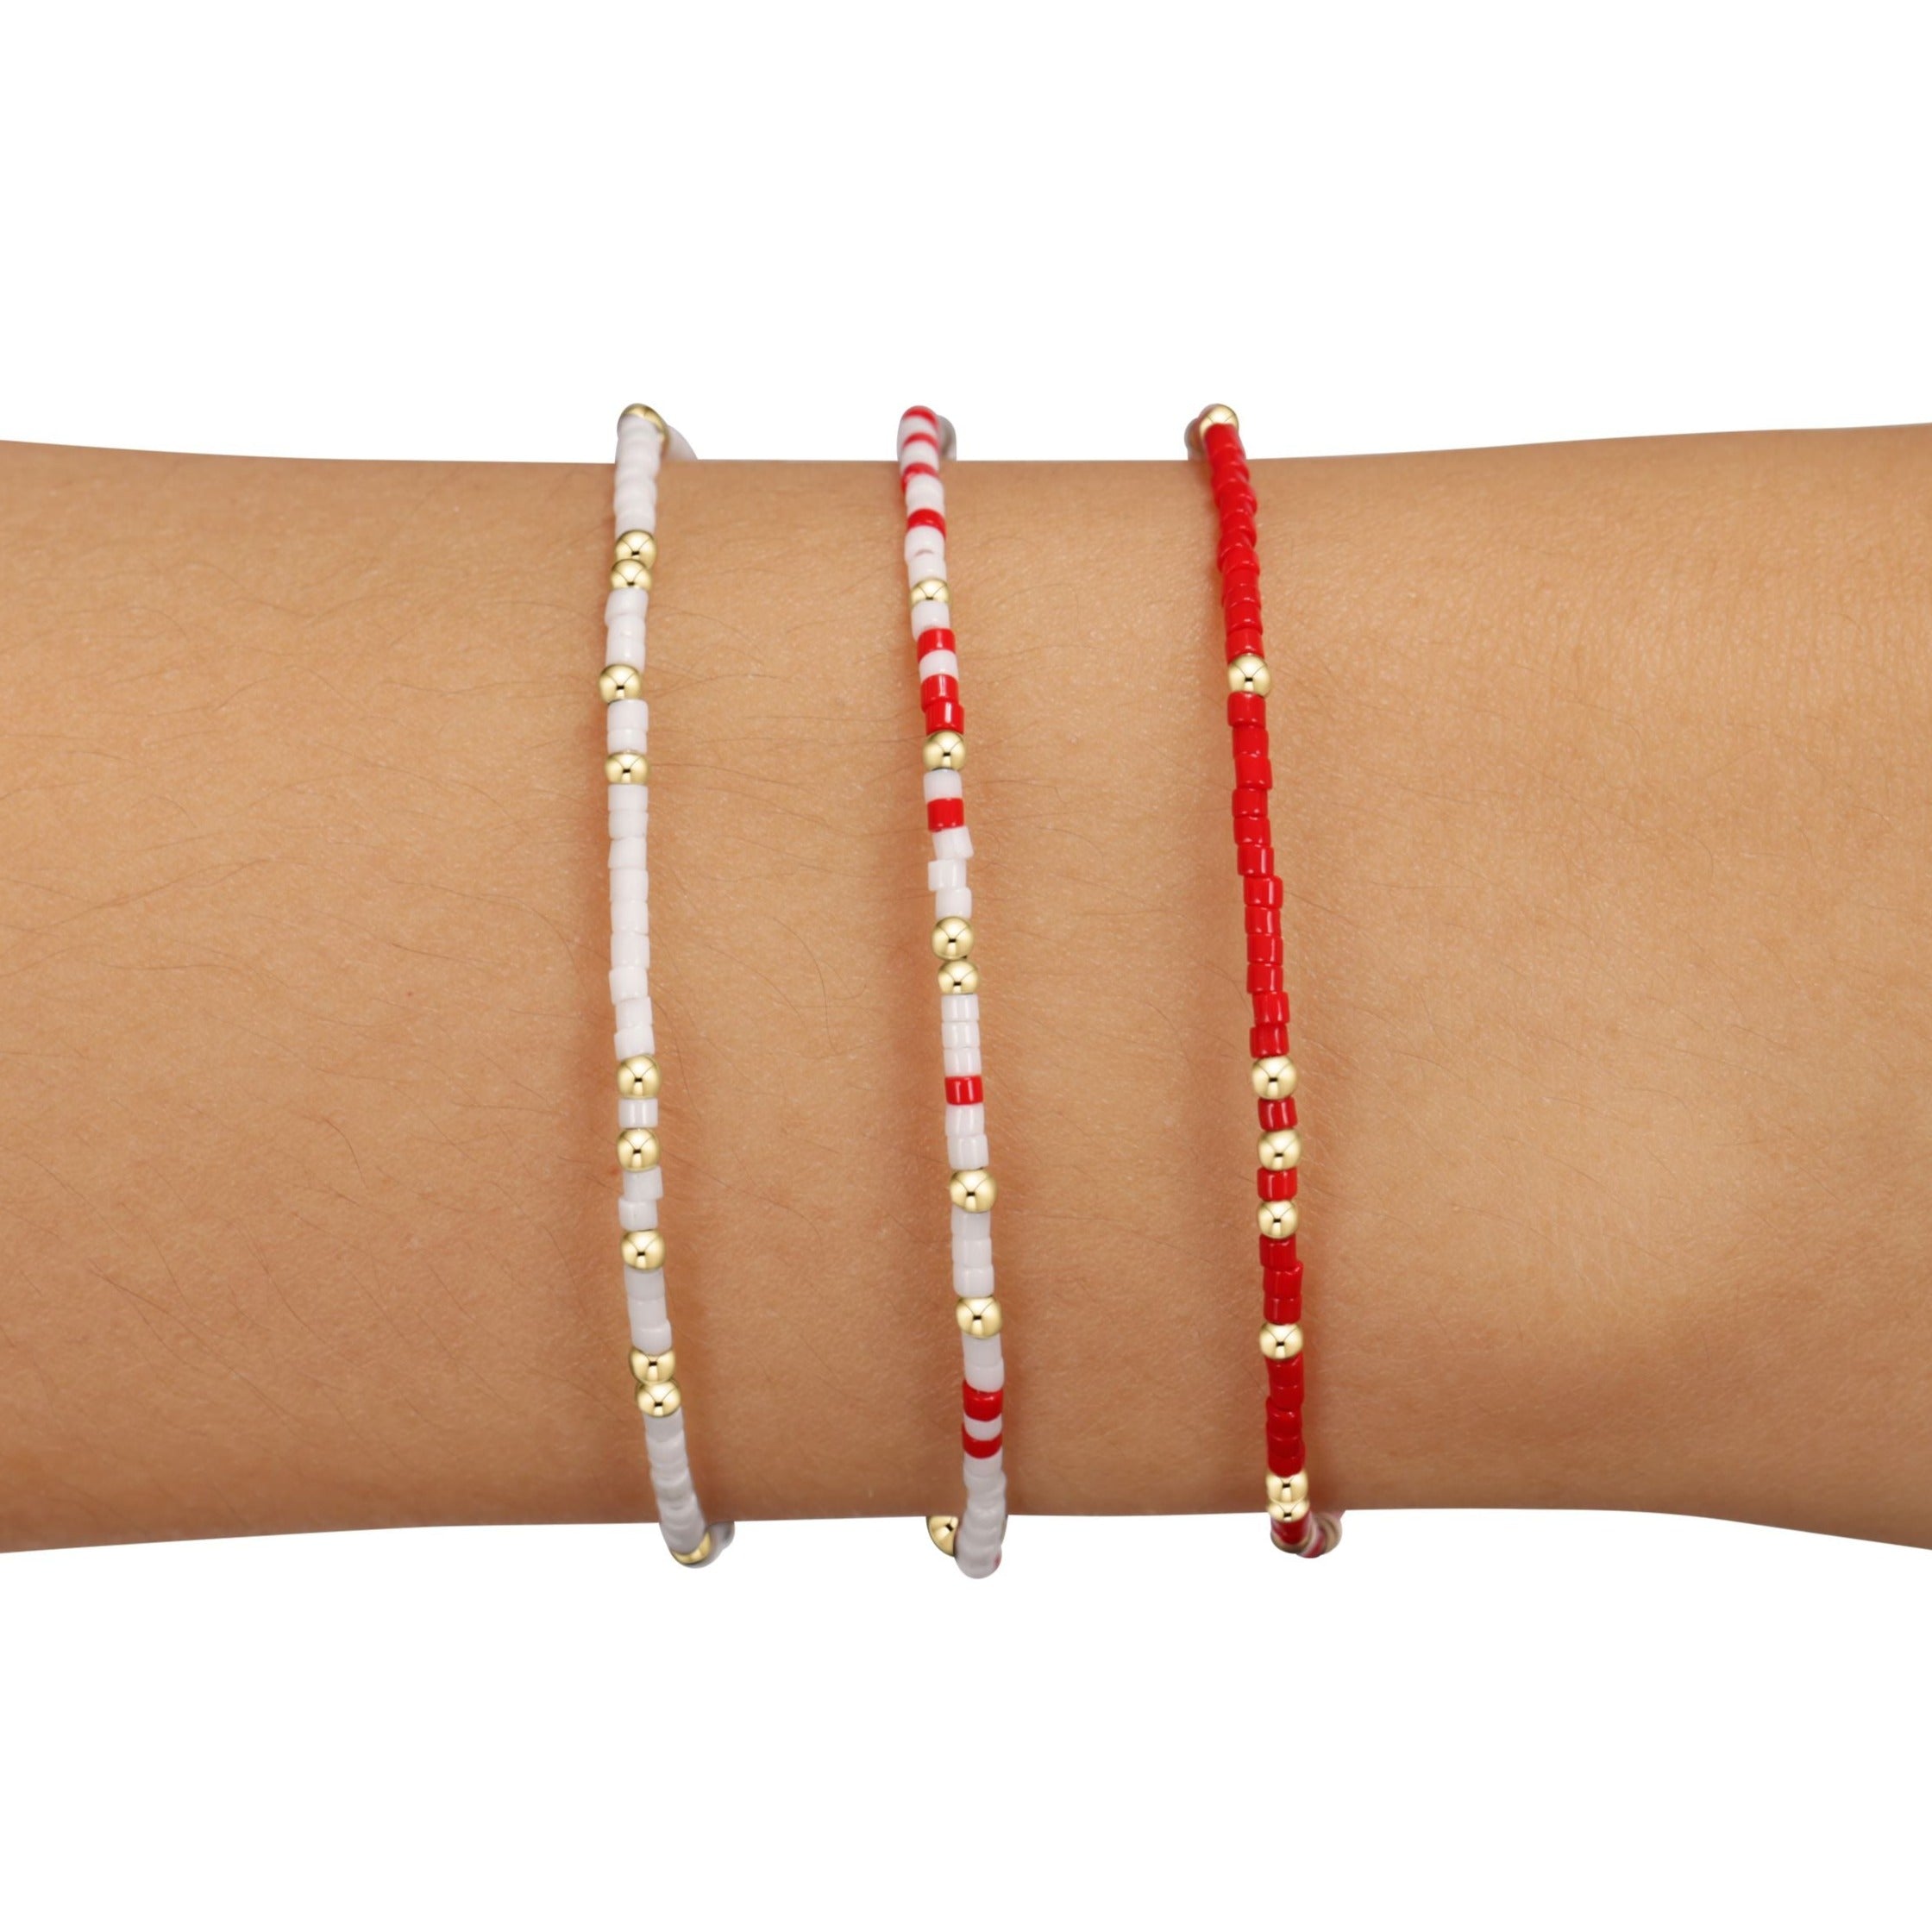 "Down, Set, Hut" Gameday Stack of 3 - Bright Red-White